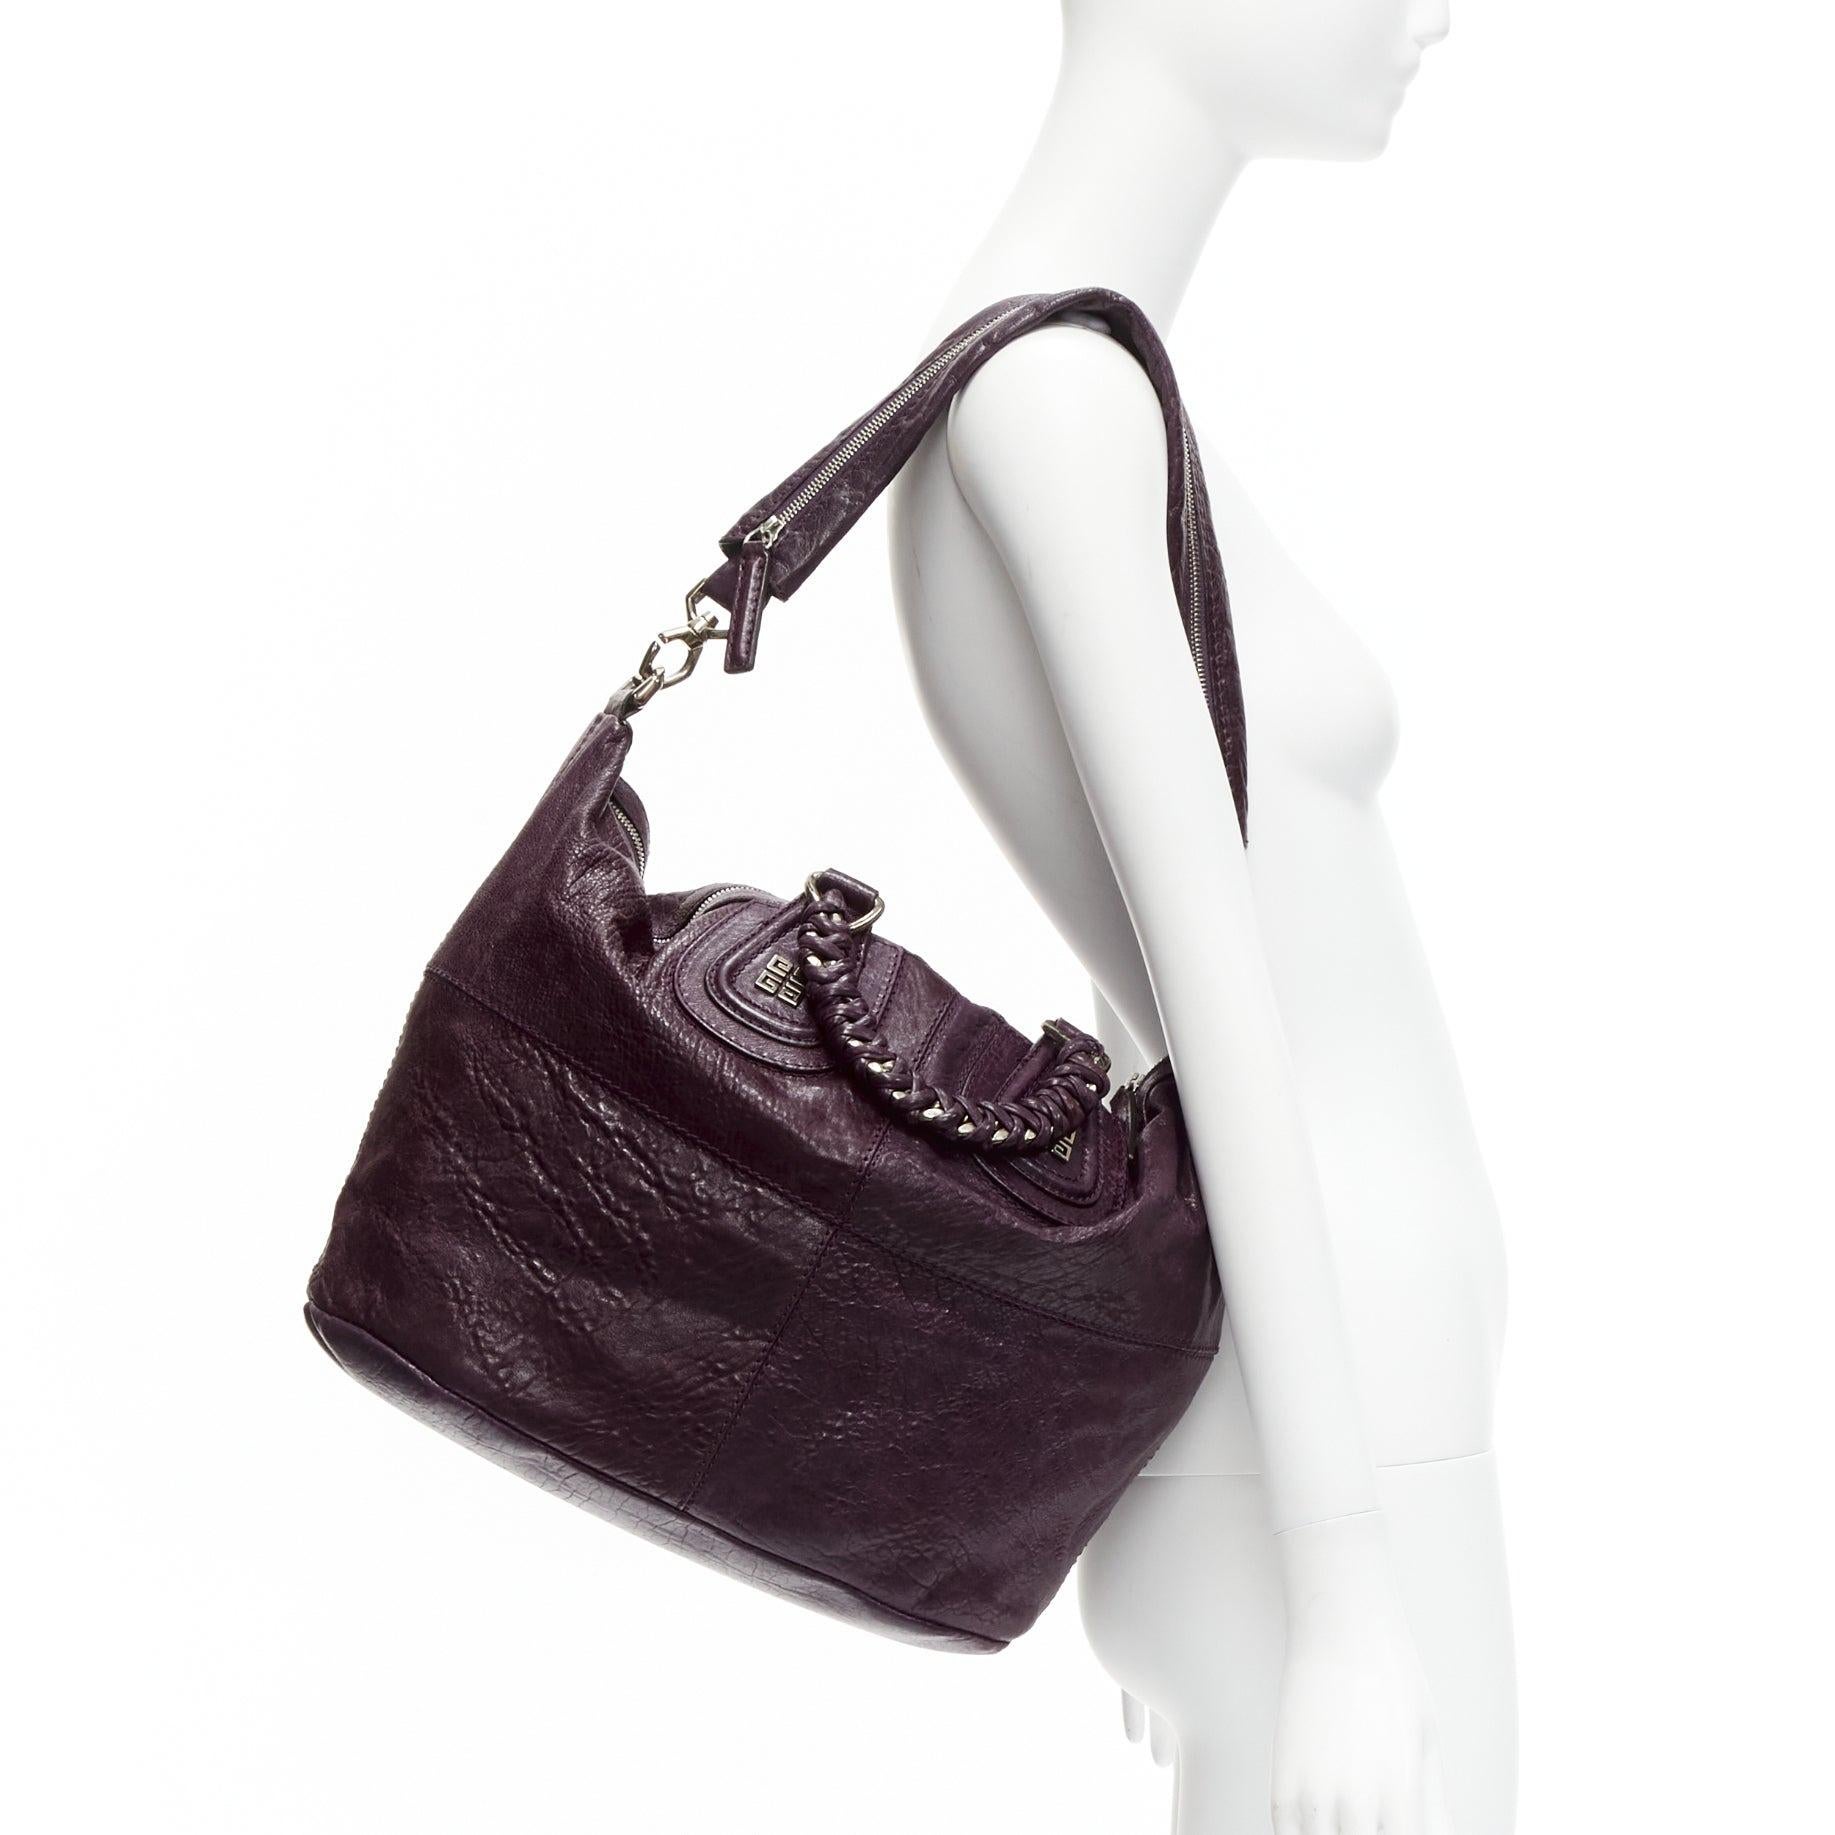 GIVENCHY Nightingale dark purple leather SHW top handle satchel bag
Reference: CELE/A00020
Brand: Givenchy
Model: Nightingale
Material: Leather
Color: Purple
Pattern: Solid
Closure: Zip
Lining: Black Fabric
Extra Details: Givenchy Top Handle Bag.